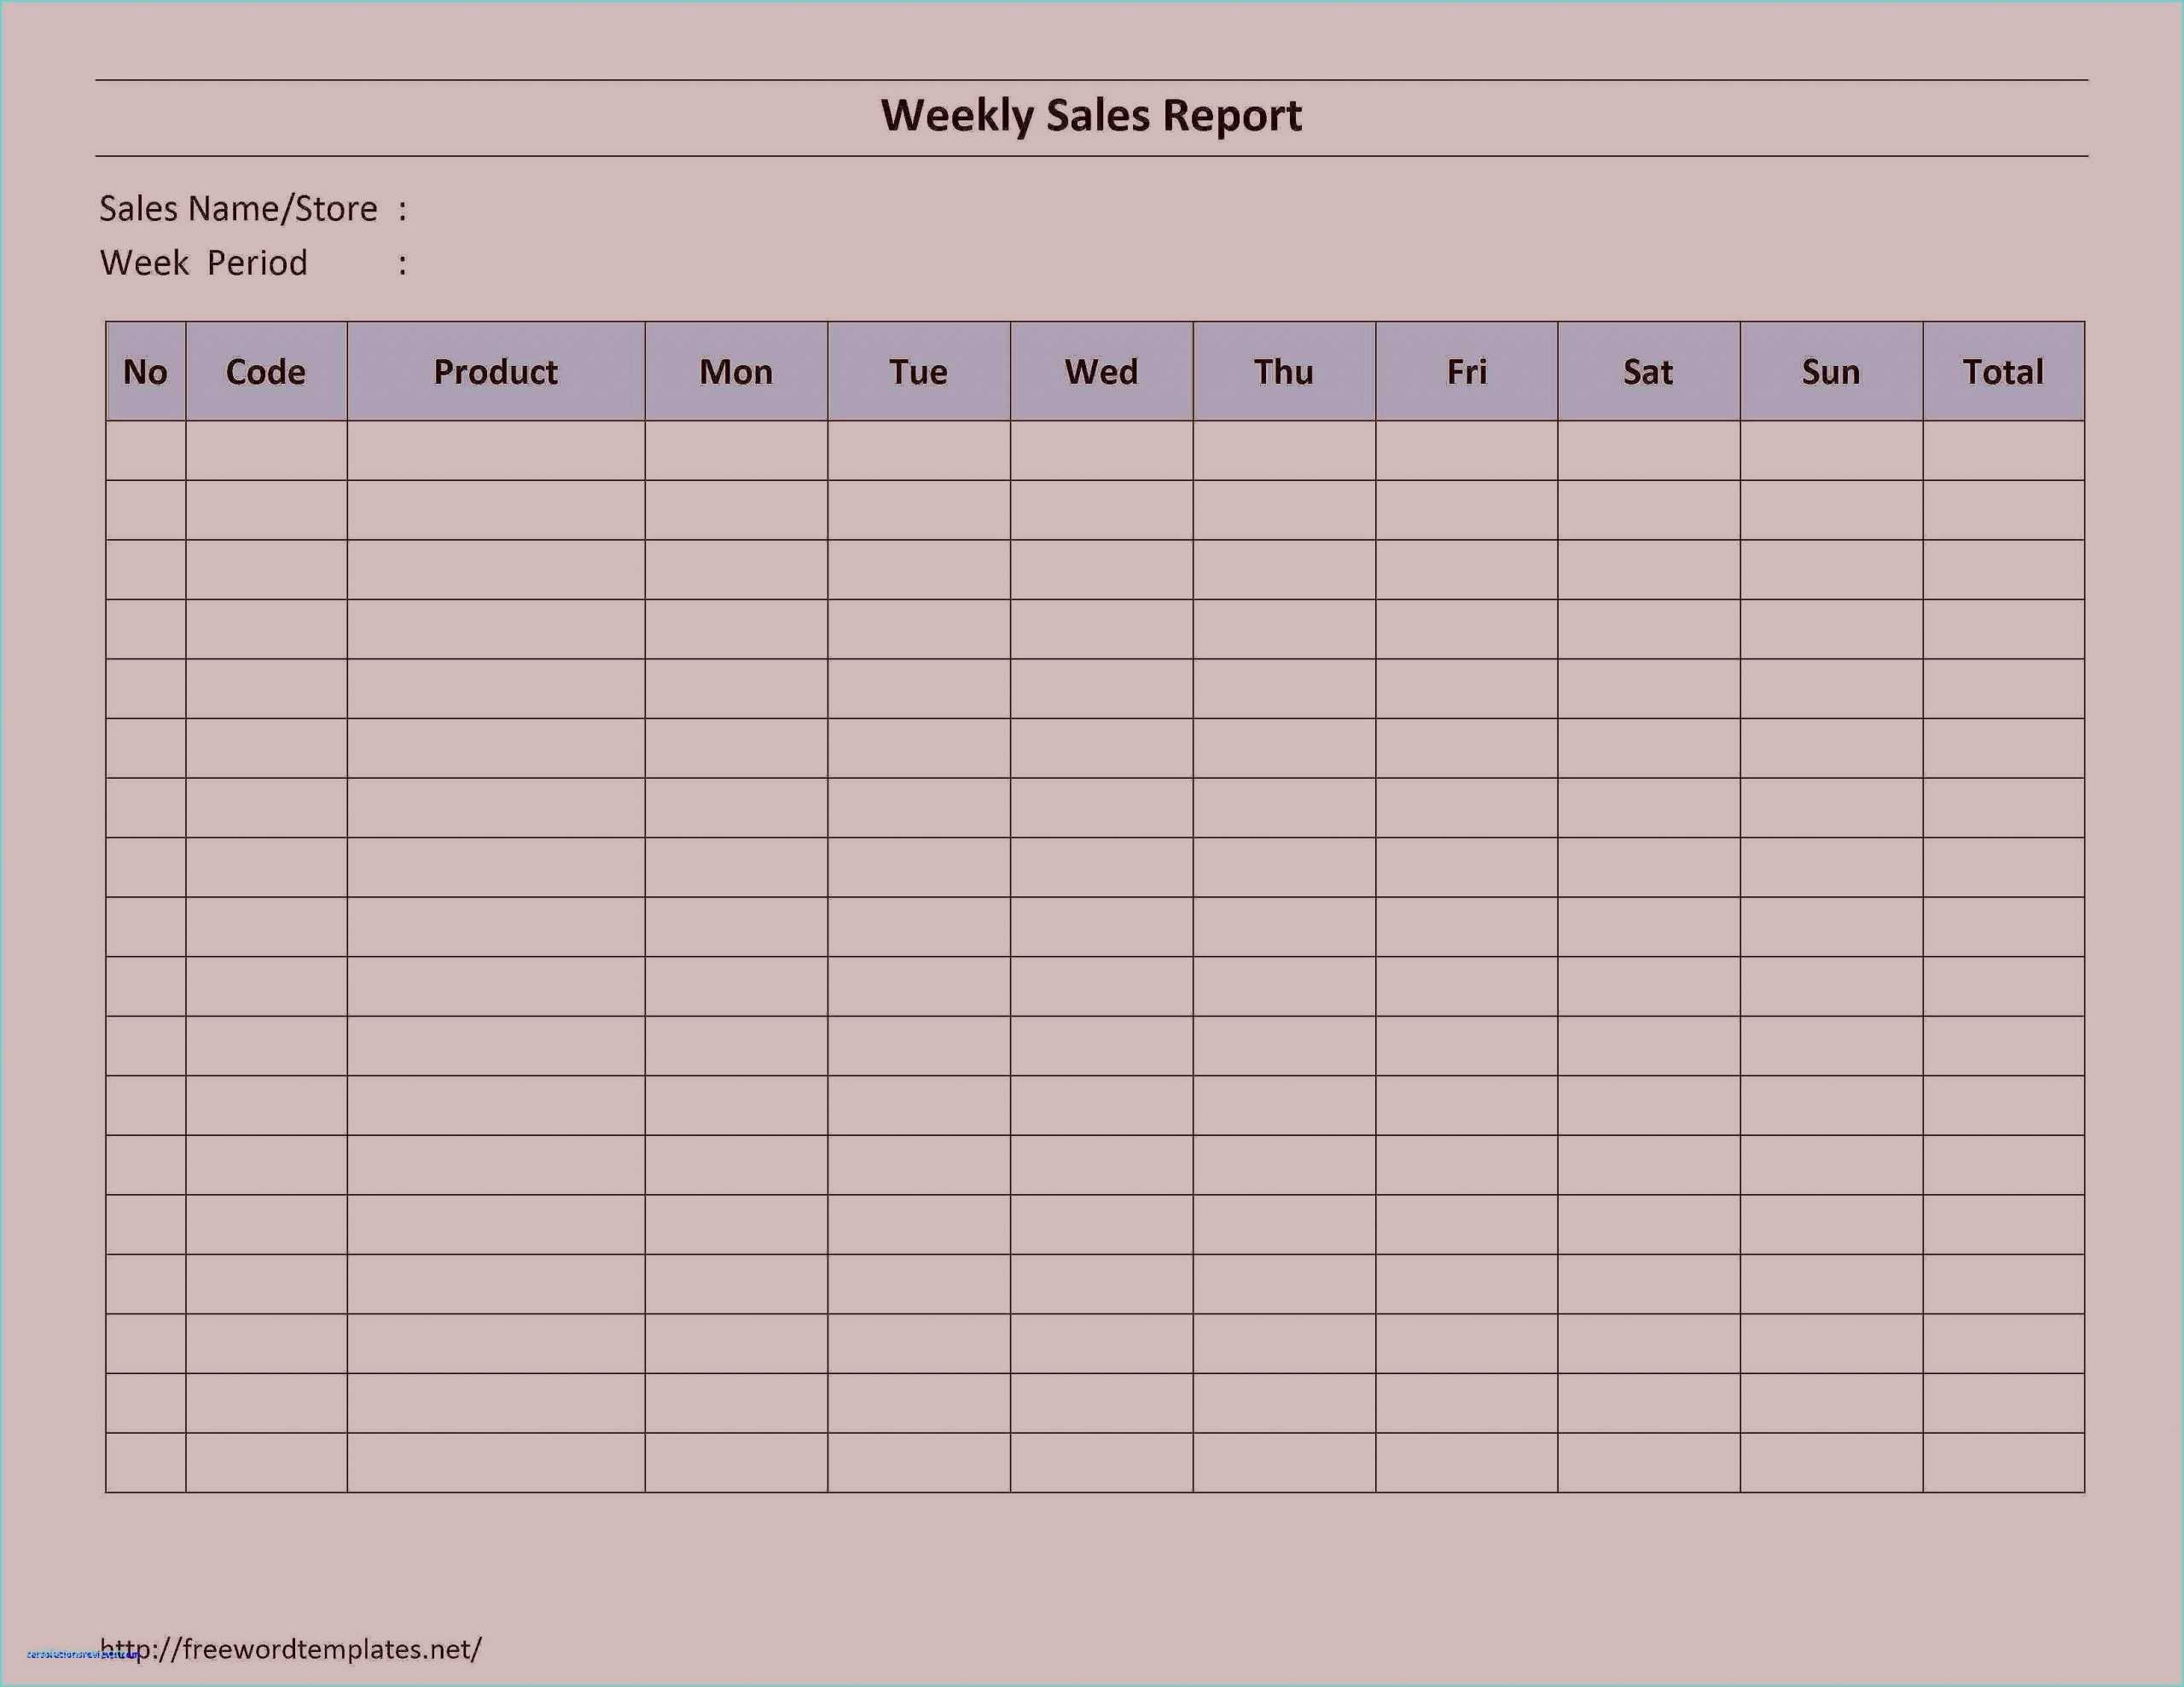 Spreadsheet Report And Weekly Sales Template Activity With Regard To Sales Activity Report Template Excel